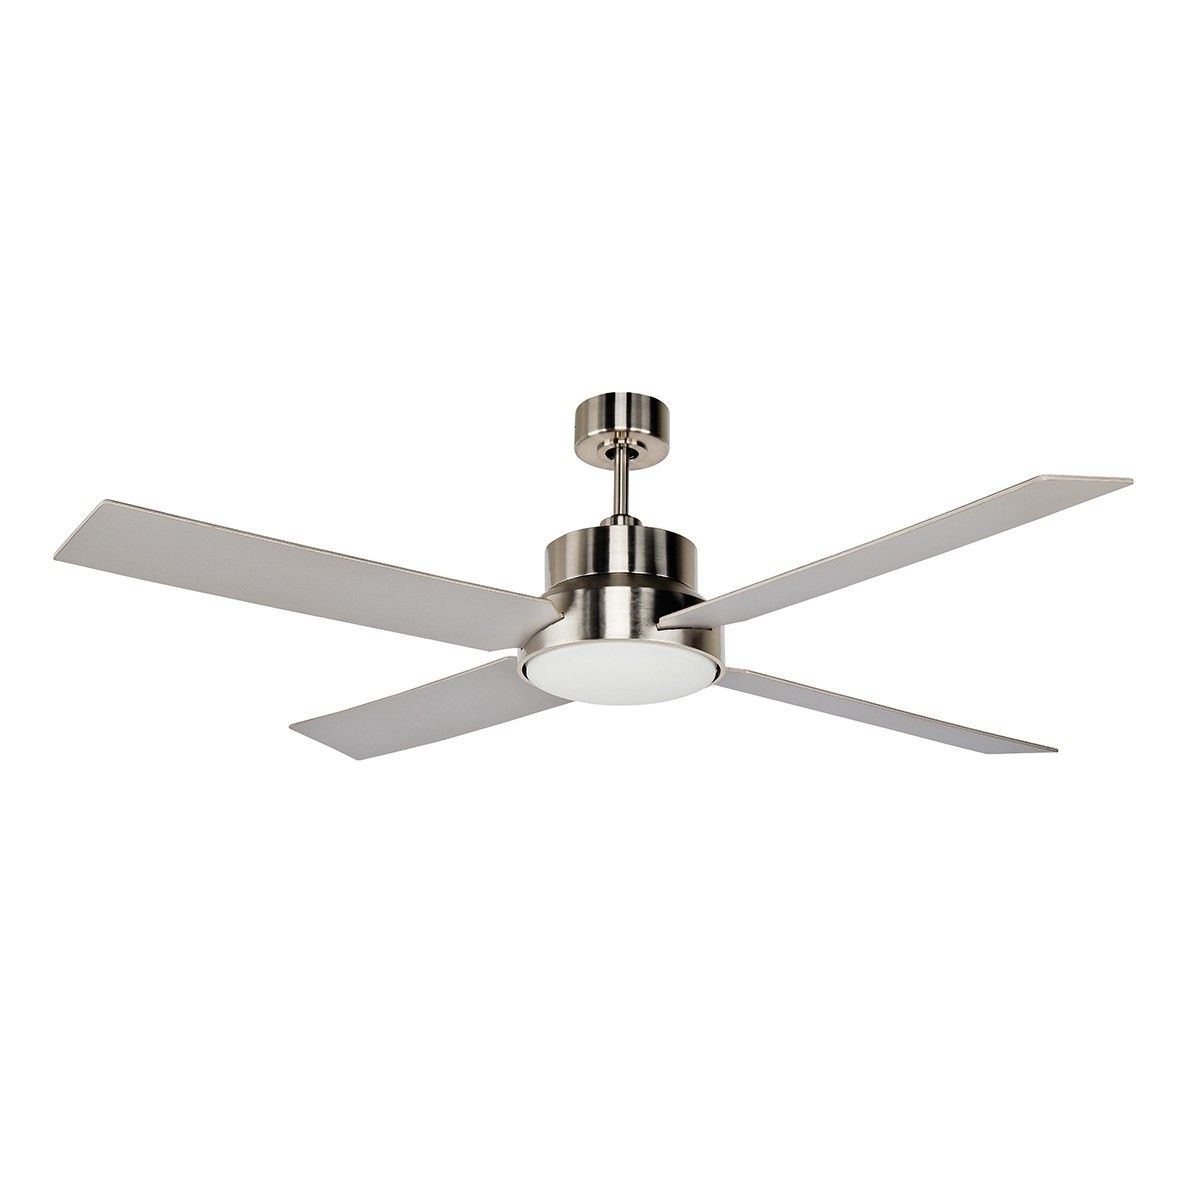 2019 Modern Outdoor Ceiling Fans Pertaining To Dialogue Outdoor Ceiling Fan :: Stori Modern (View 1 of 20)